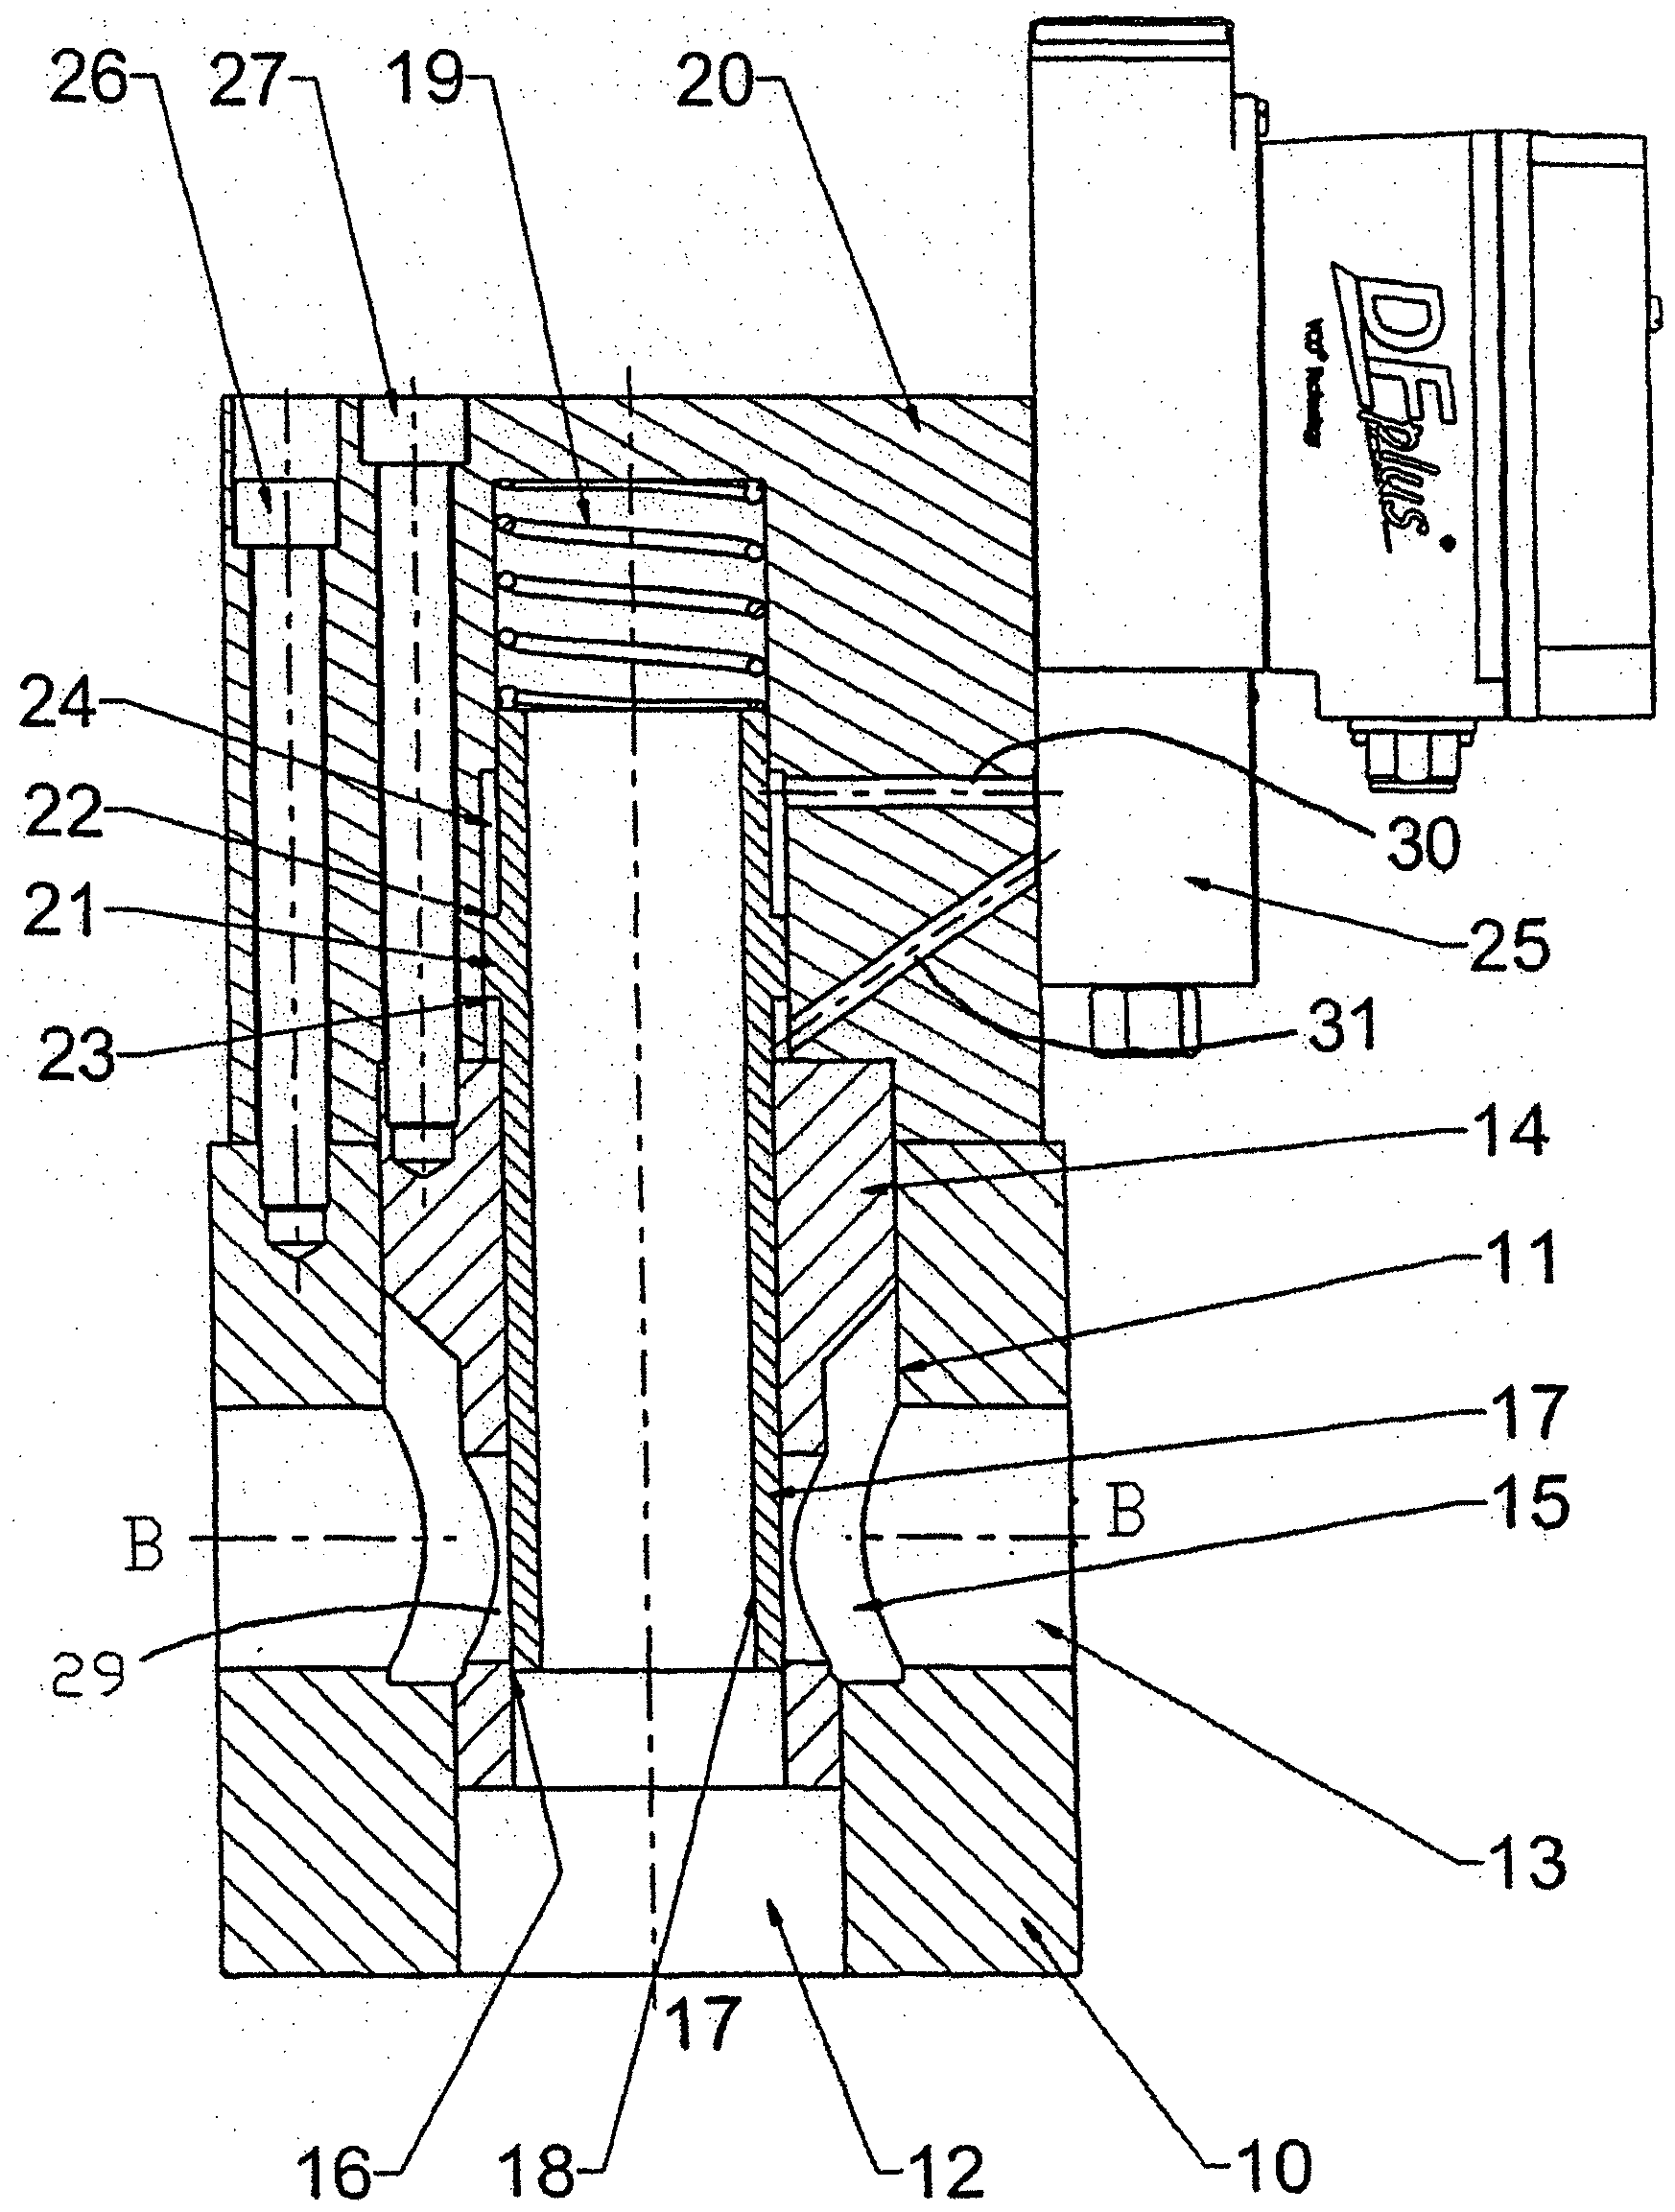 Hydraulic valve assembly having a cartridge insert valve exhibiting a closing element arranged in a pressure equalized manner